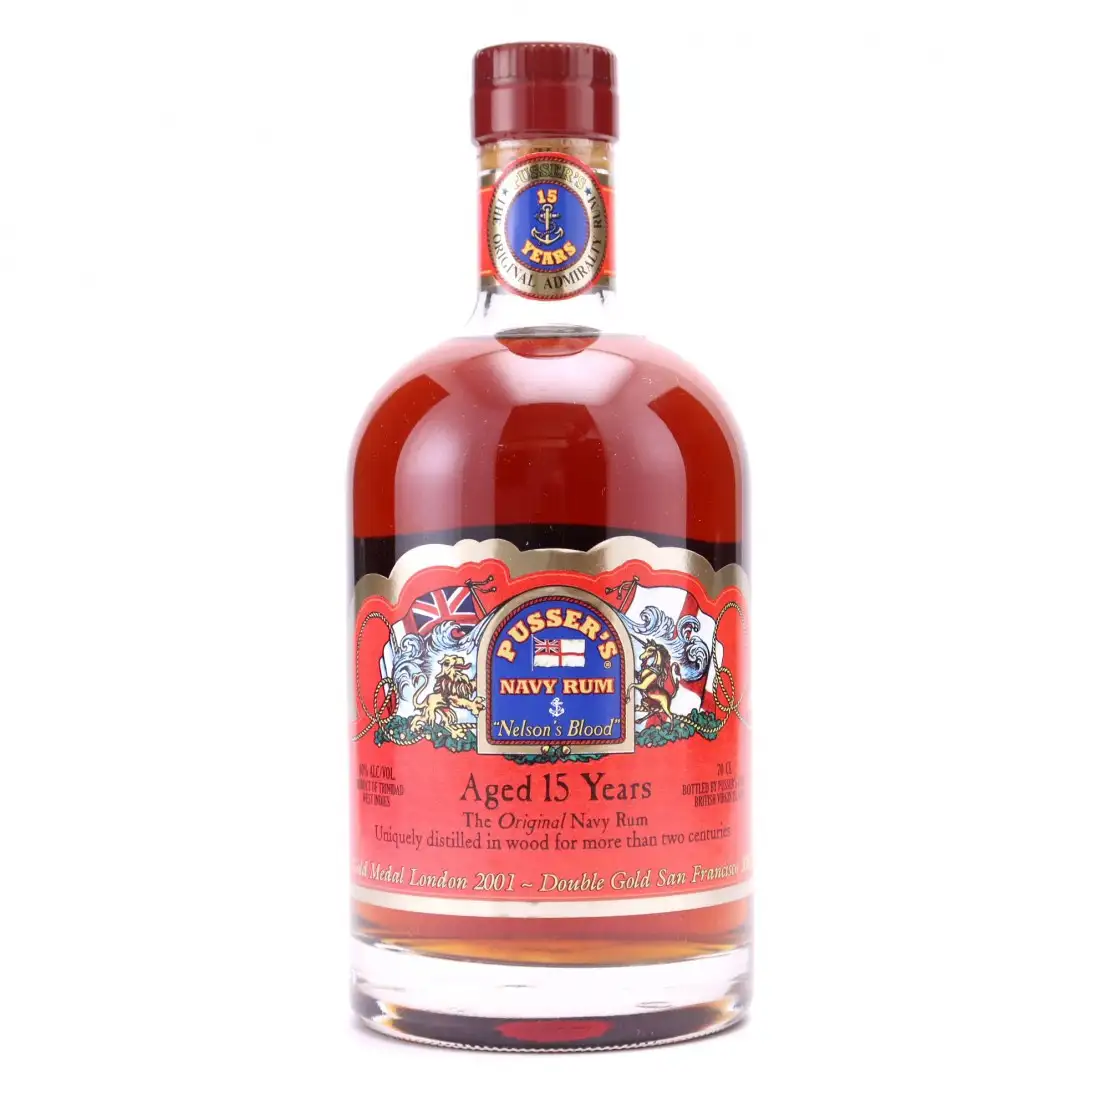 Image of the front of the bottle of the rum „Nelson‘s Blood“ Aged 15 Years Navy Rum